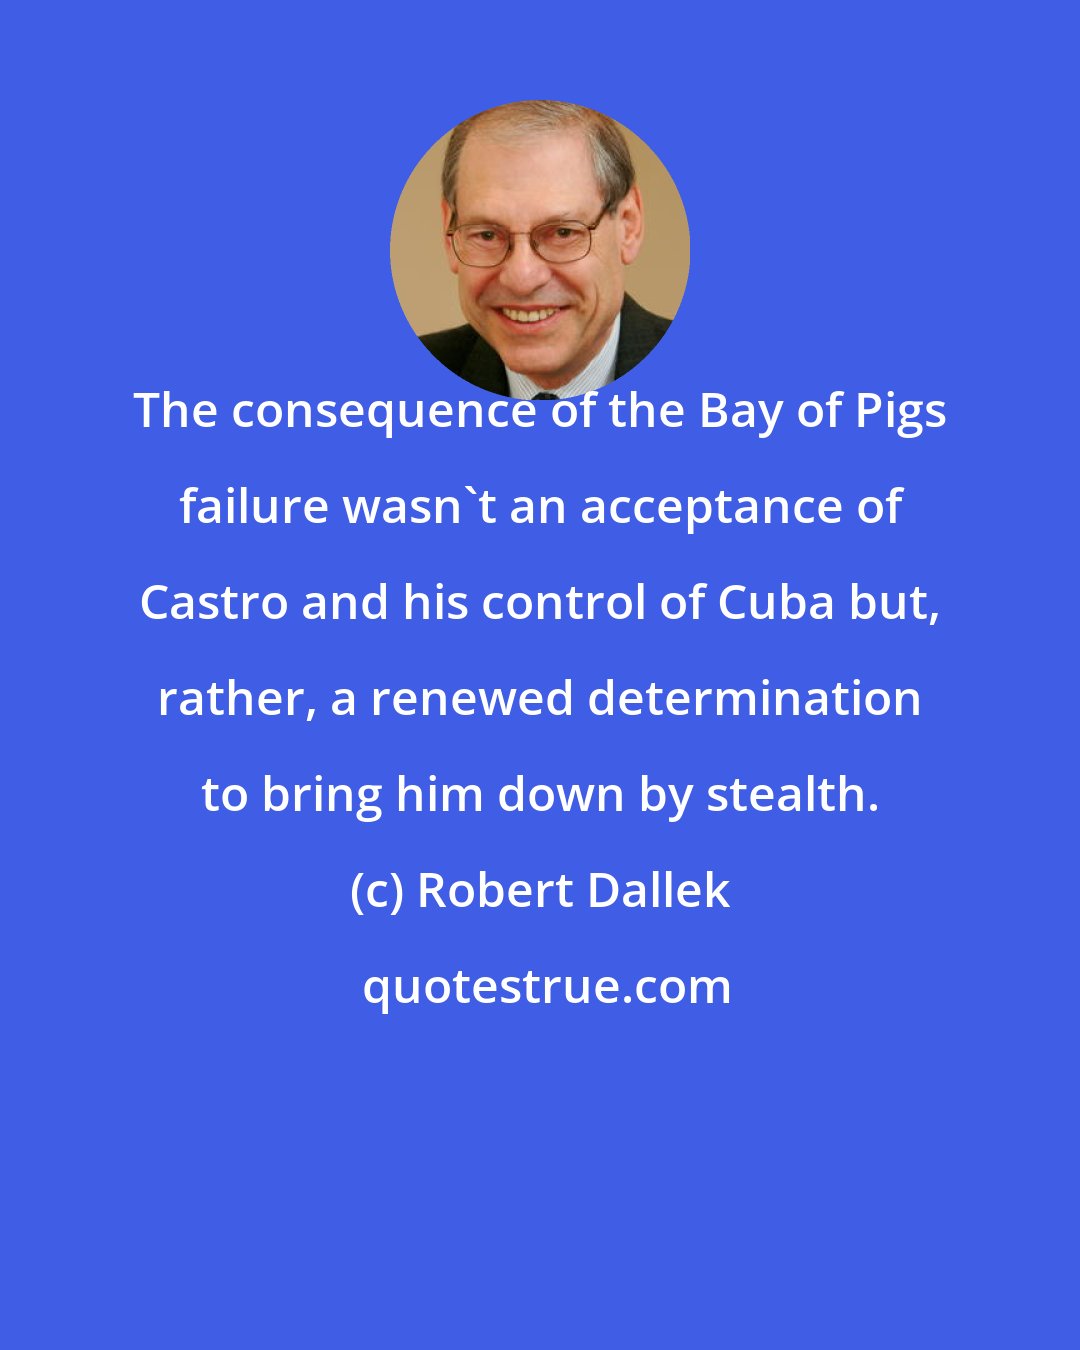 Robert Dallek: The consequence of the Bay of Pigs failure wasn't an acceptance of Castro and his control of Cuba but, rather, a renewed determination to bring him down by stealth.